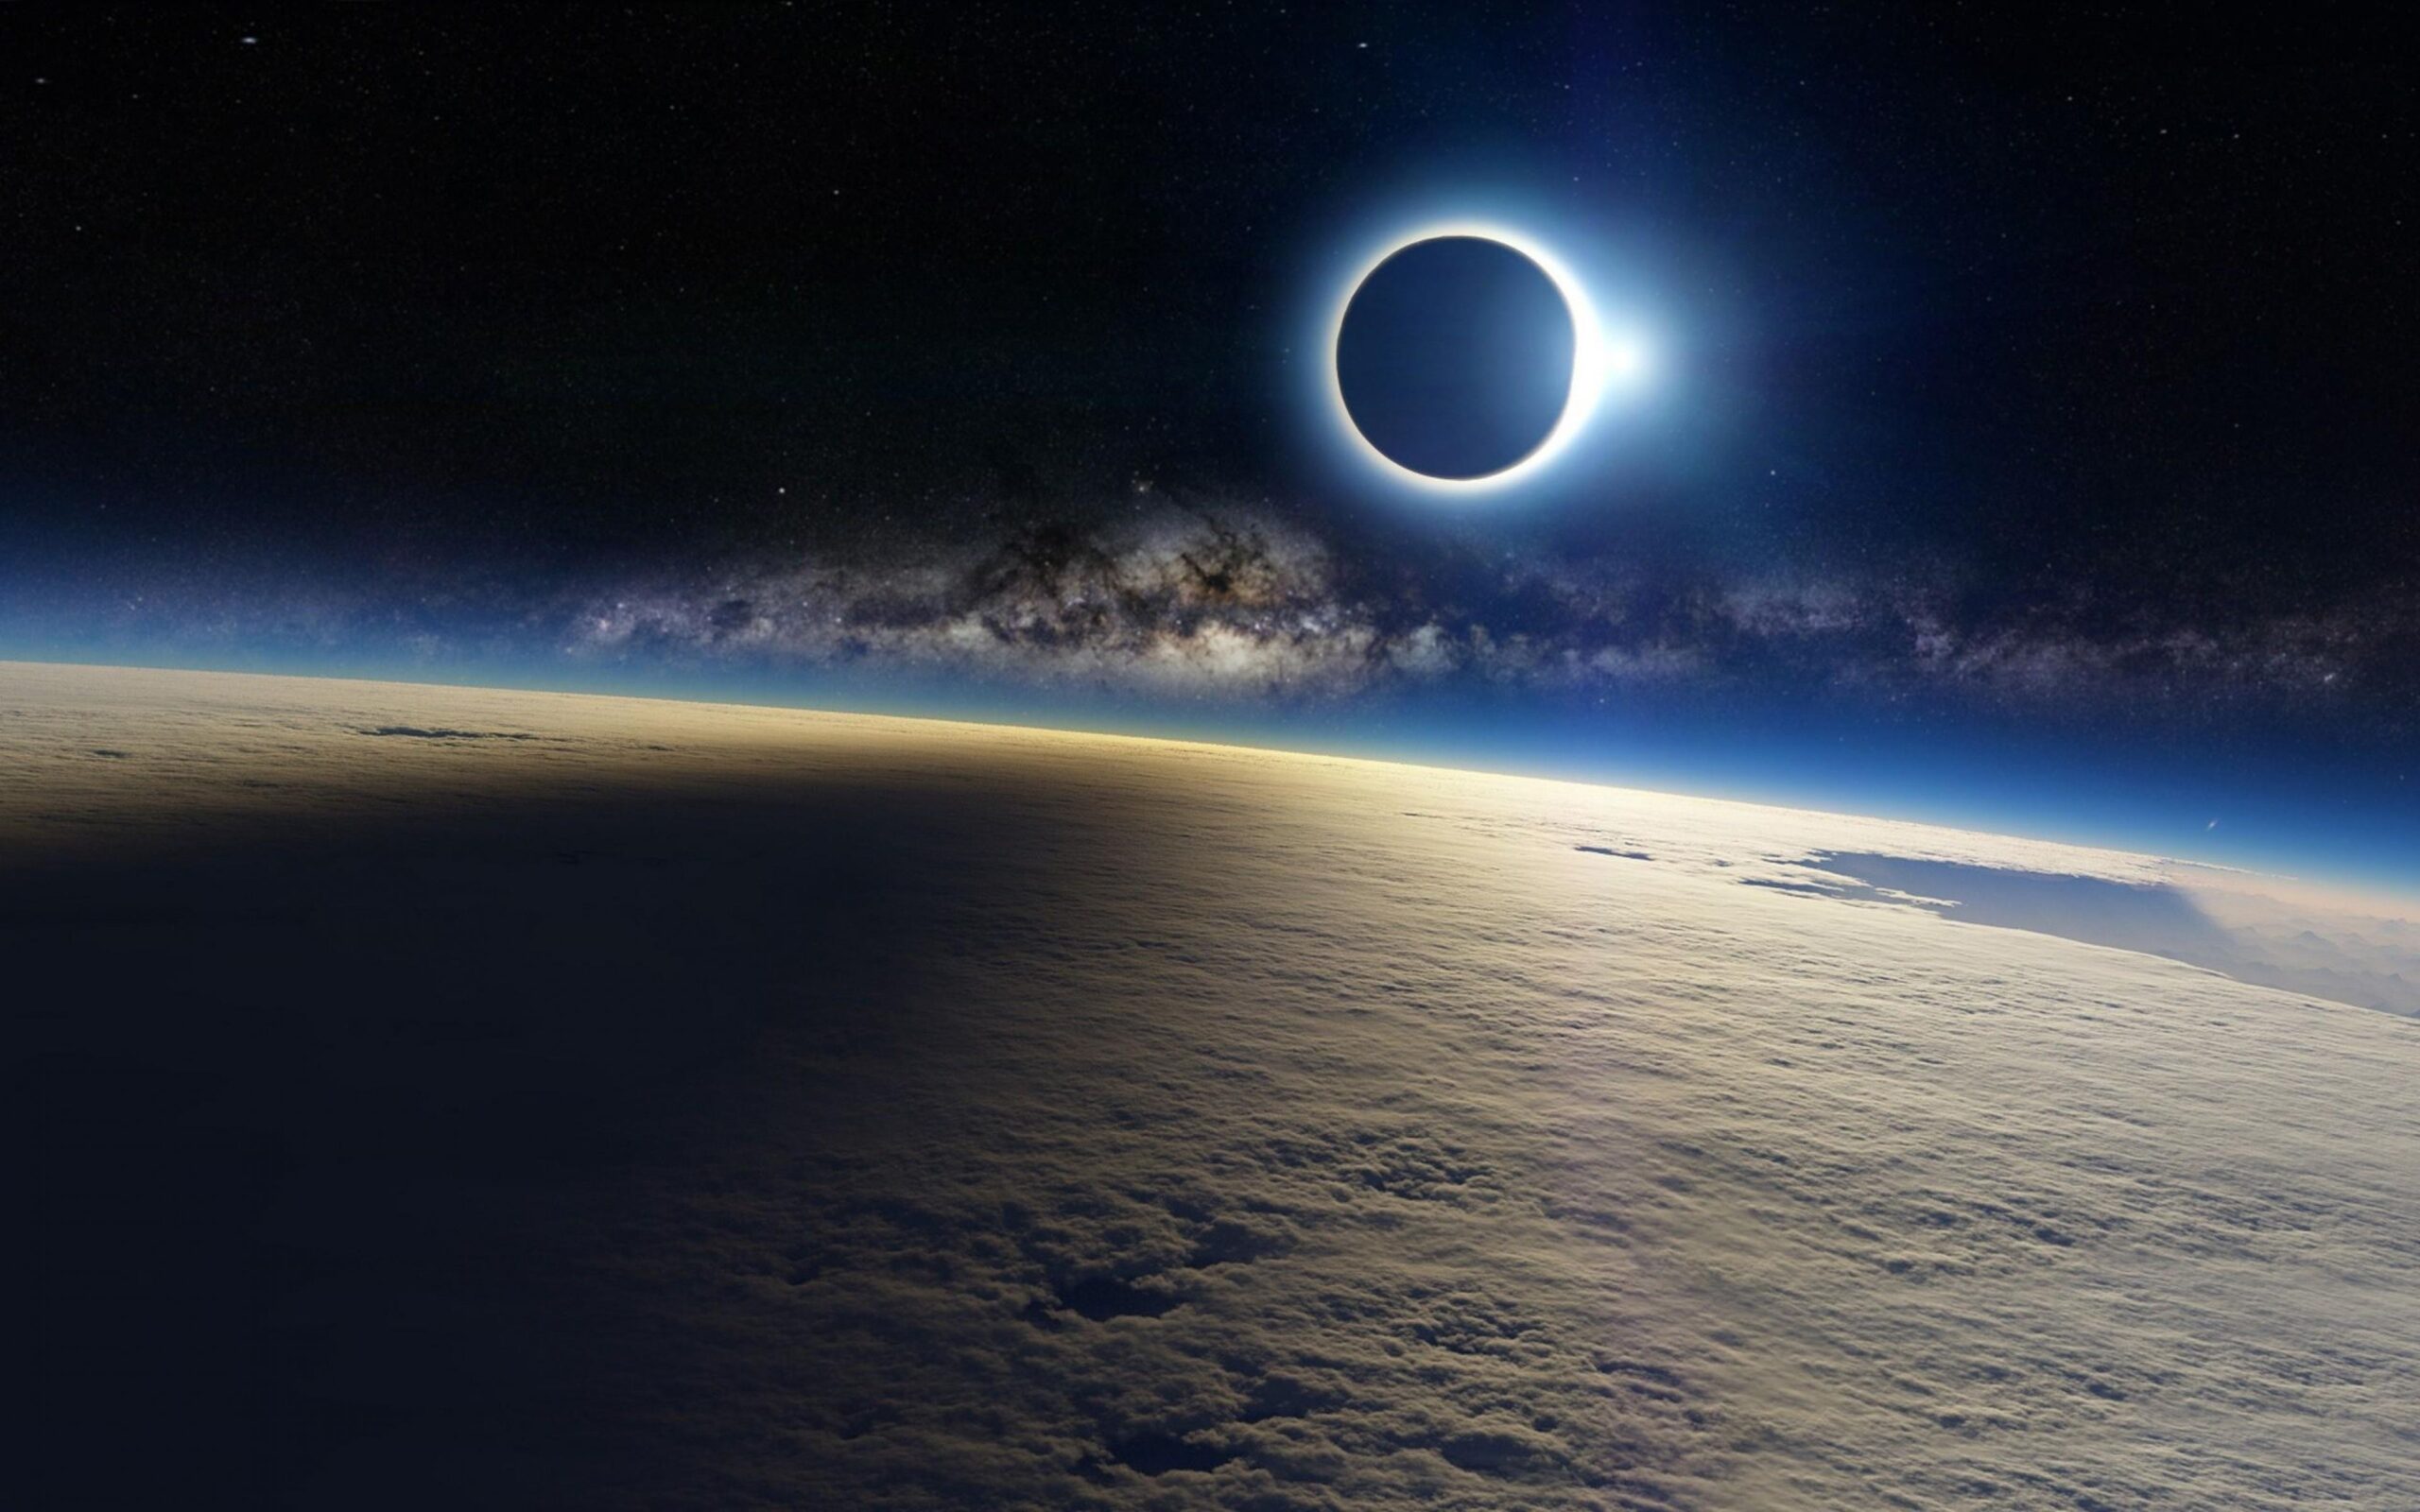 Astronauts on the ISS will see a total solar eclipse three times on April 8